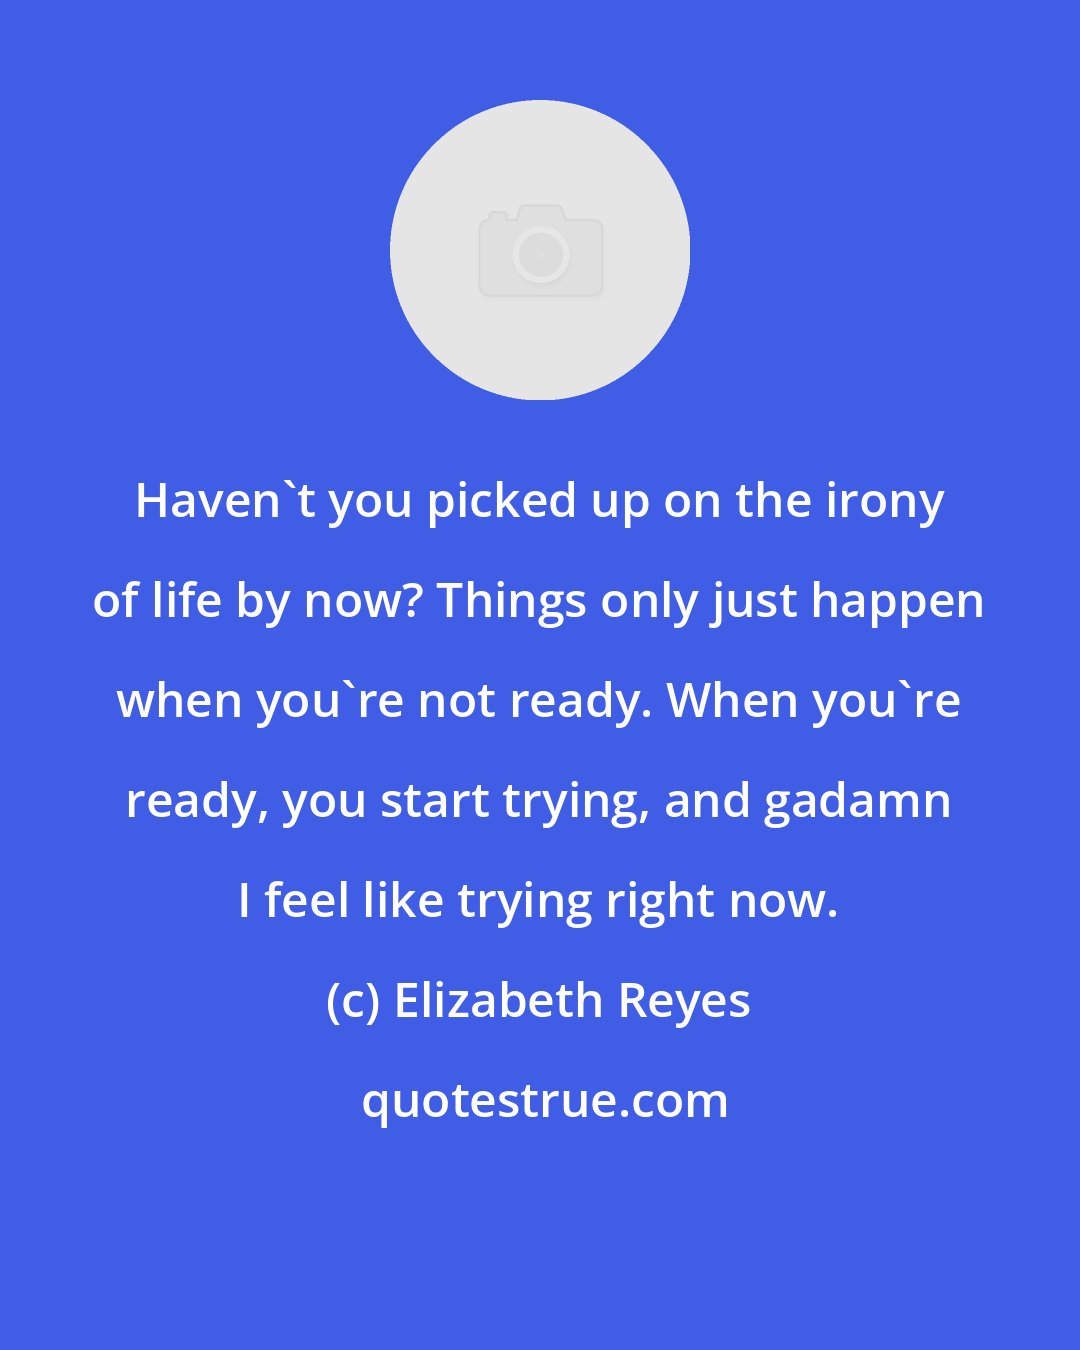 Elizabeth Reyes: Haven't you picked up on the irony of life by now? Things only just happen when you're not ready. When you're ready, you start trying, and gadamn I feel like trying right now.